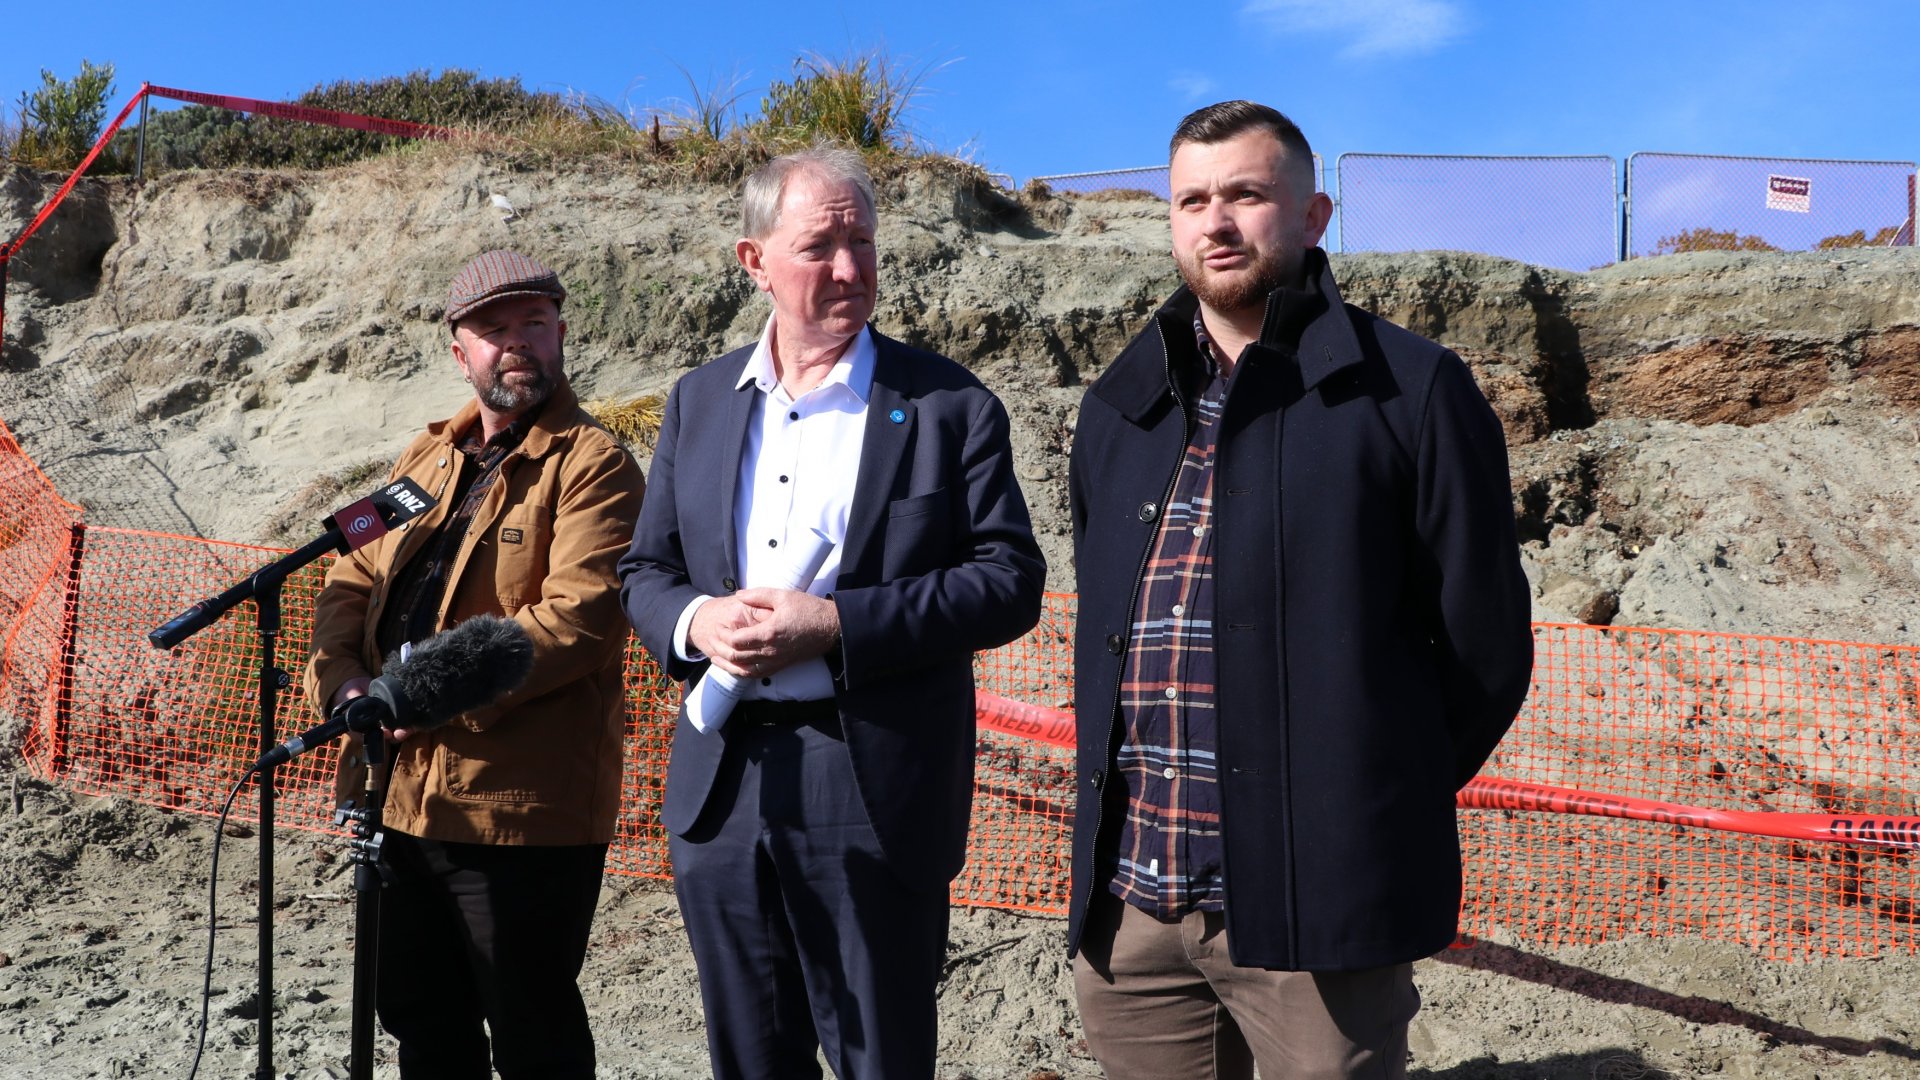 Nelson Mayor Nick Smith, centre, with Nelson City Council Group Manager Community Services Andrew White, left, and Councillor and Tāhunanui Liaison Councillor Campbell Rollo announce the findings from the latest tests of the sawdust pile at Tāhunanui back beach.